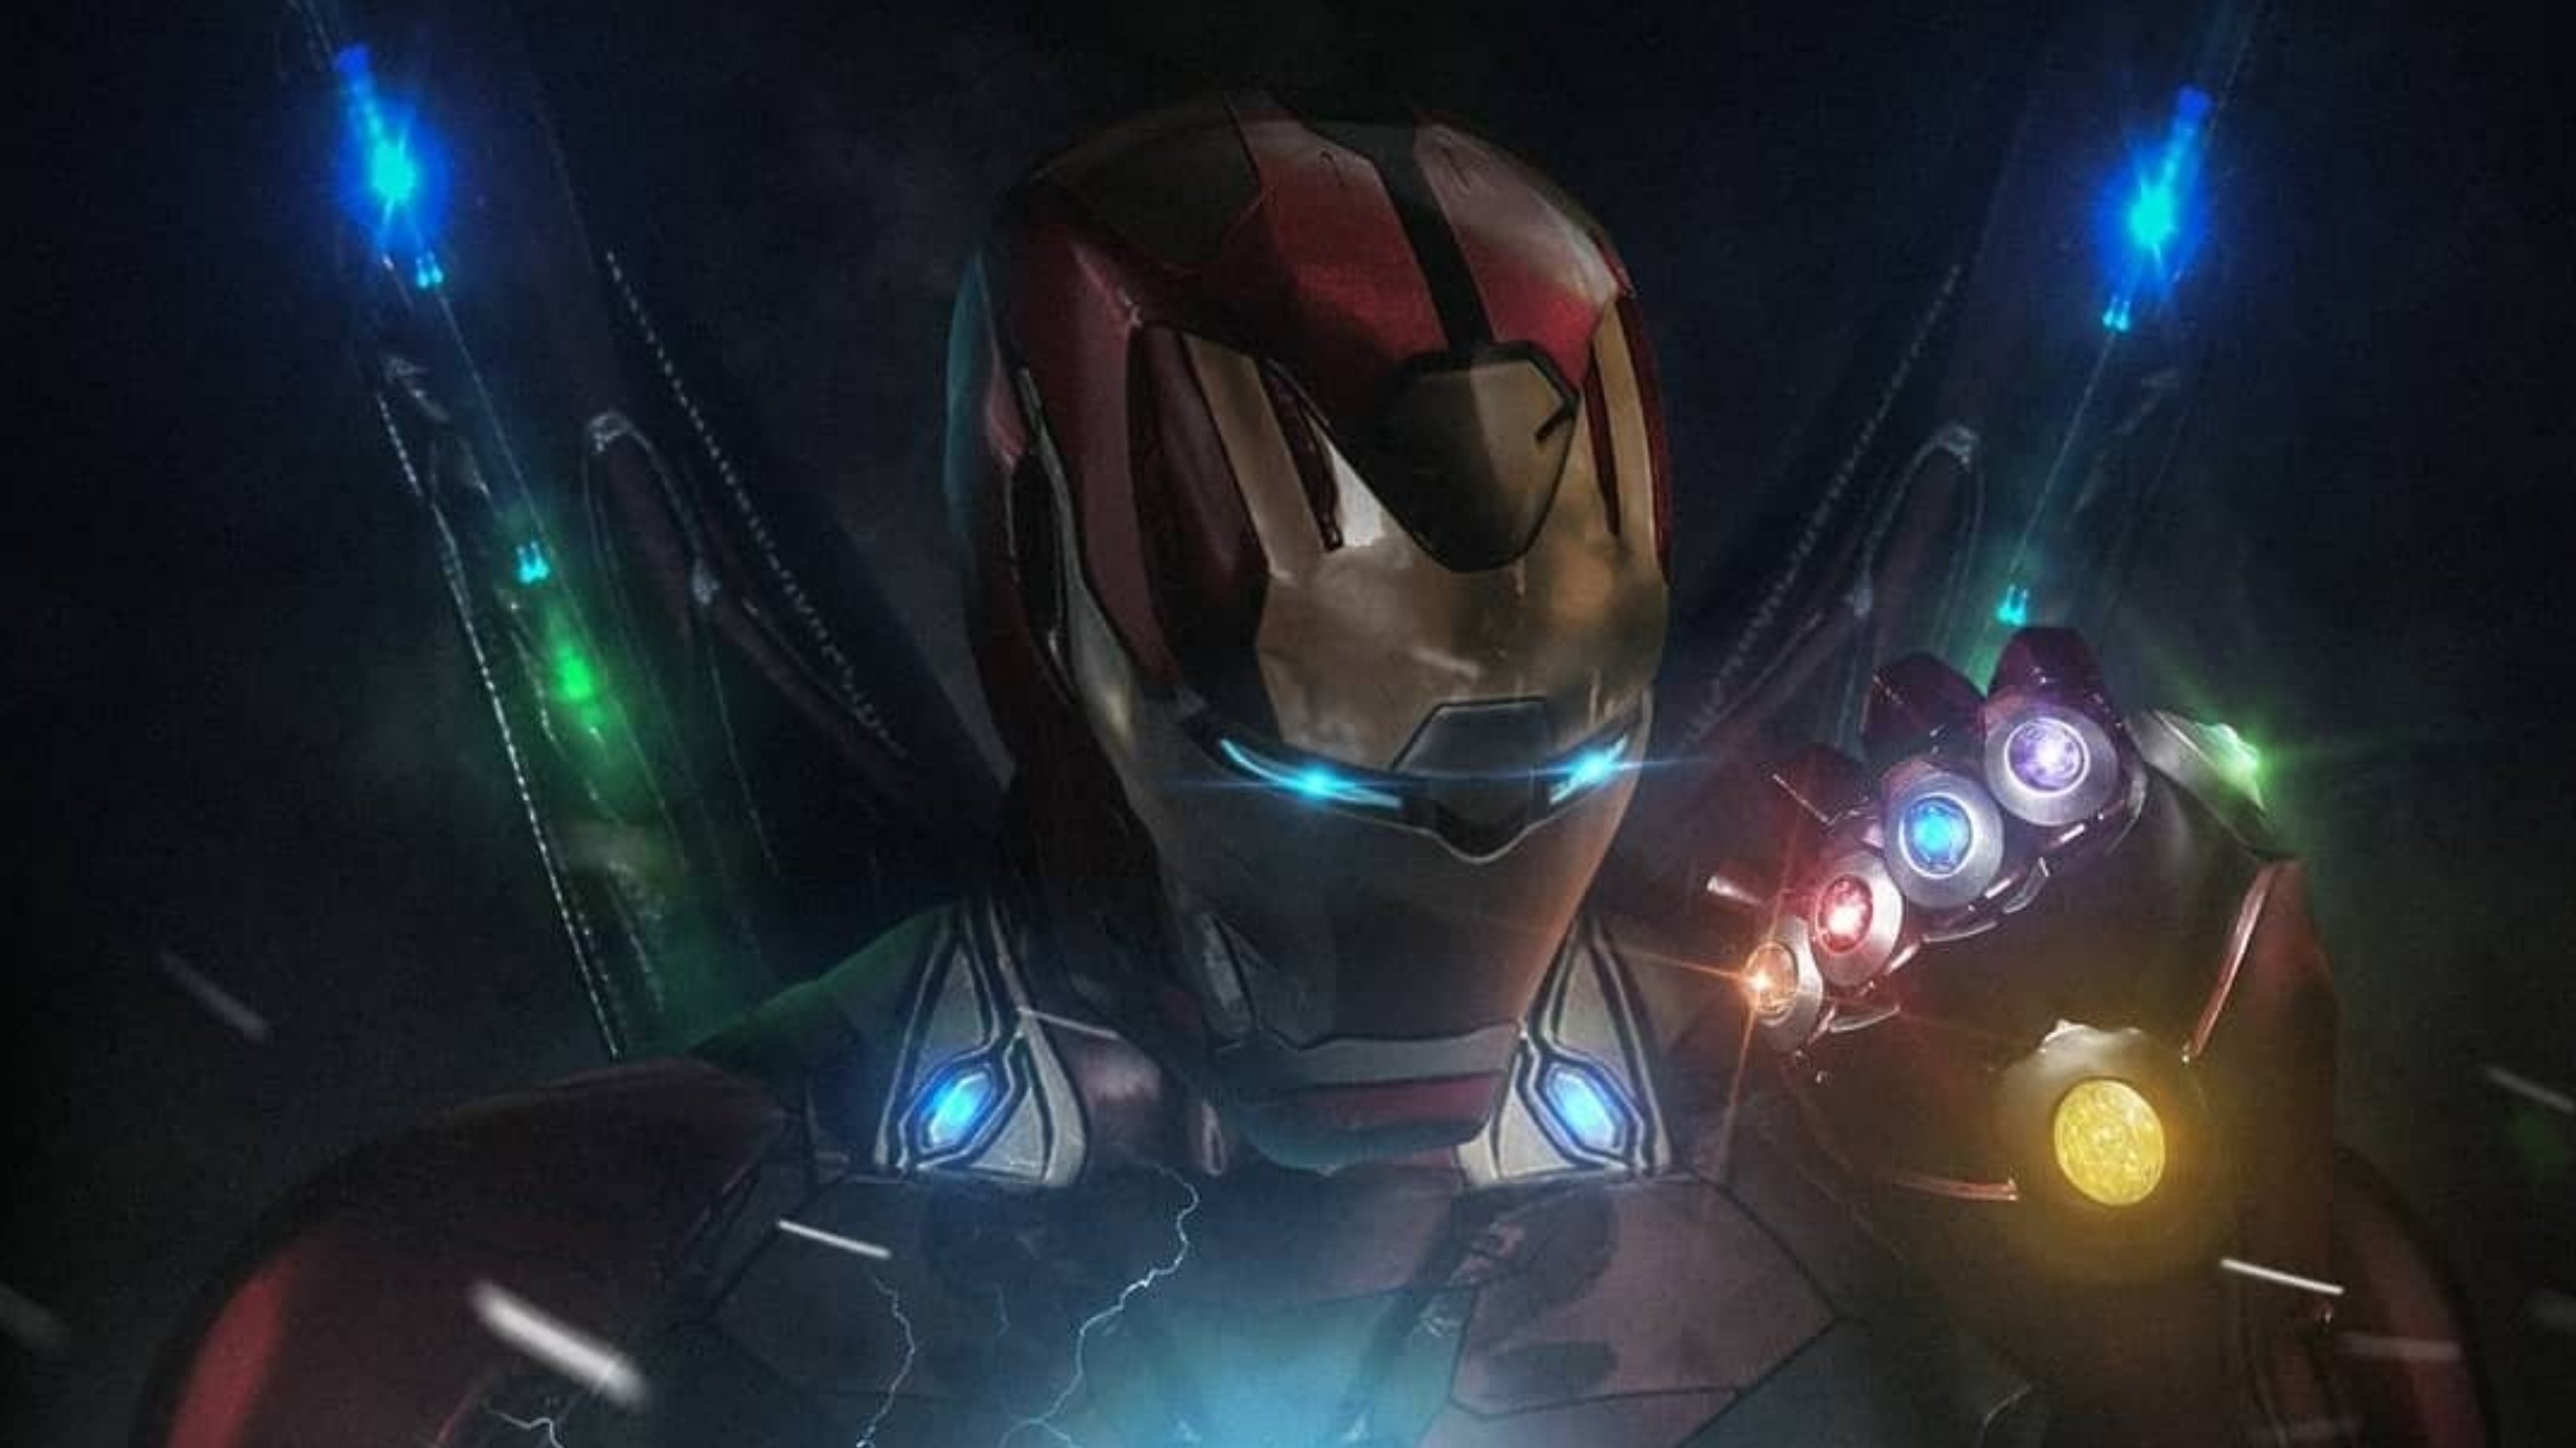 download hd wallpapers of iron man